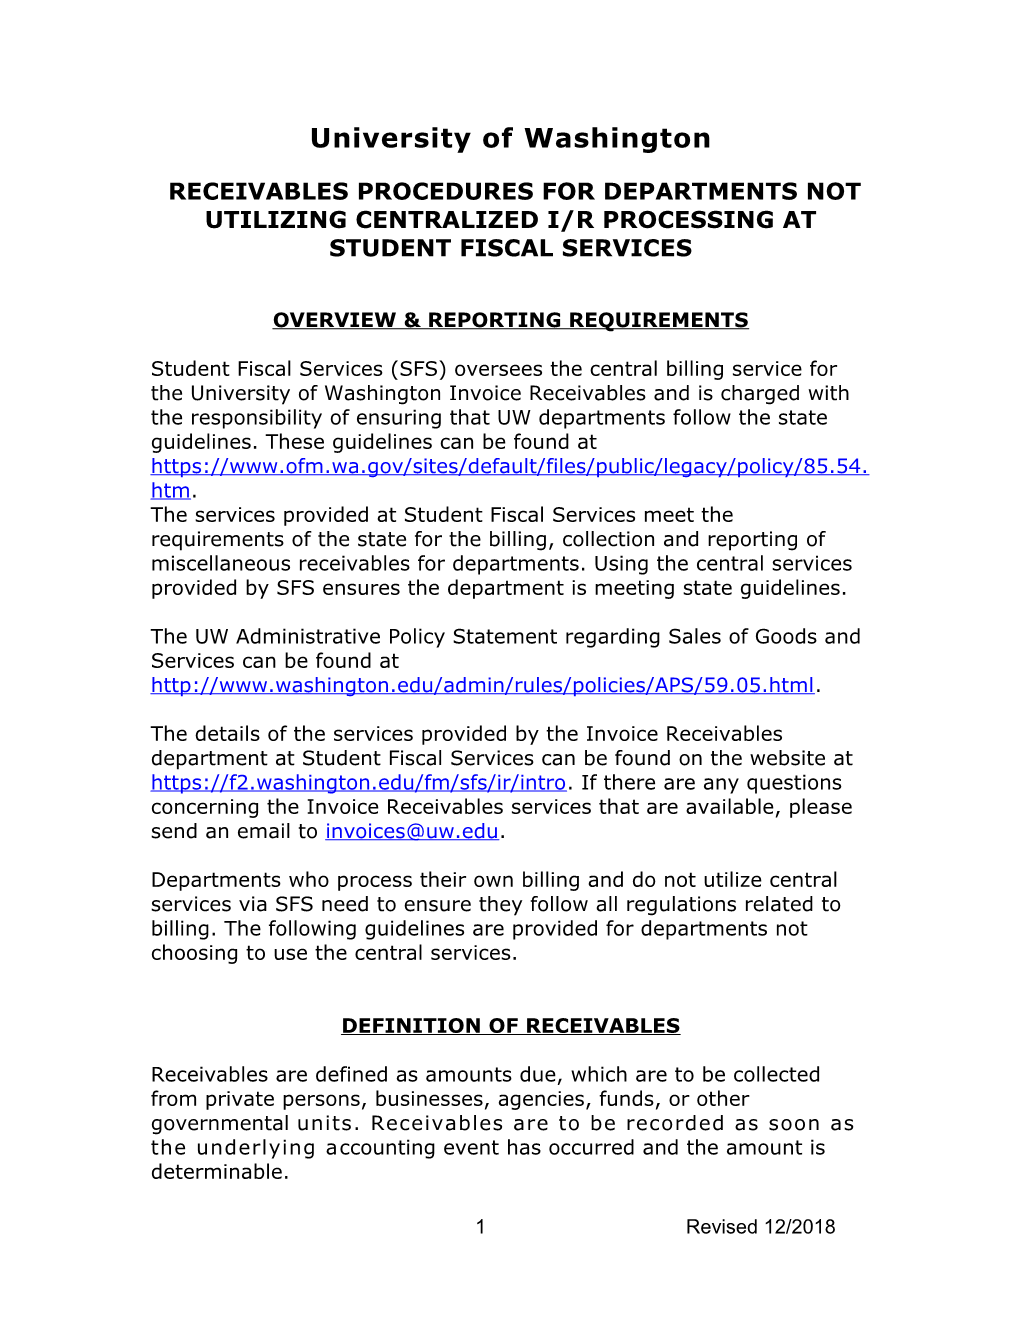 Receivables Procedures for Departments Not Utilizing Centralized I/R Processing at Student